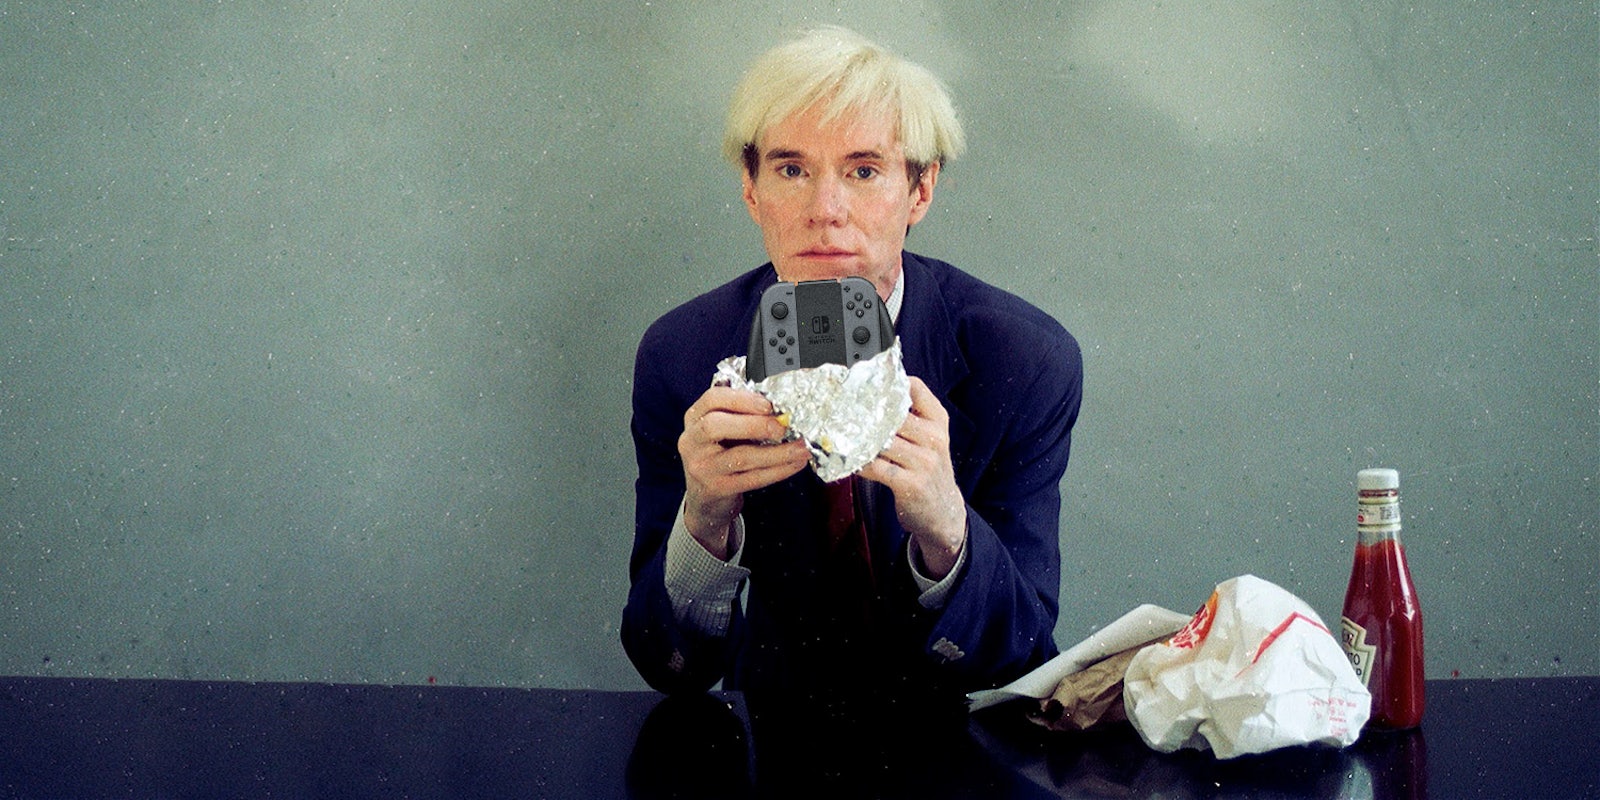 Andy Warhol eating a Nintendo Switch